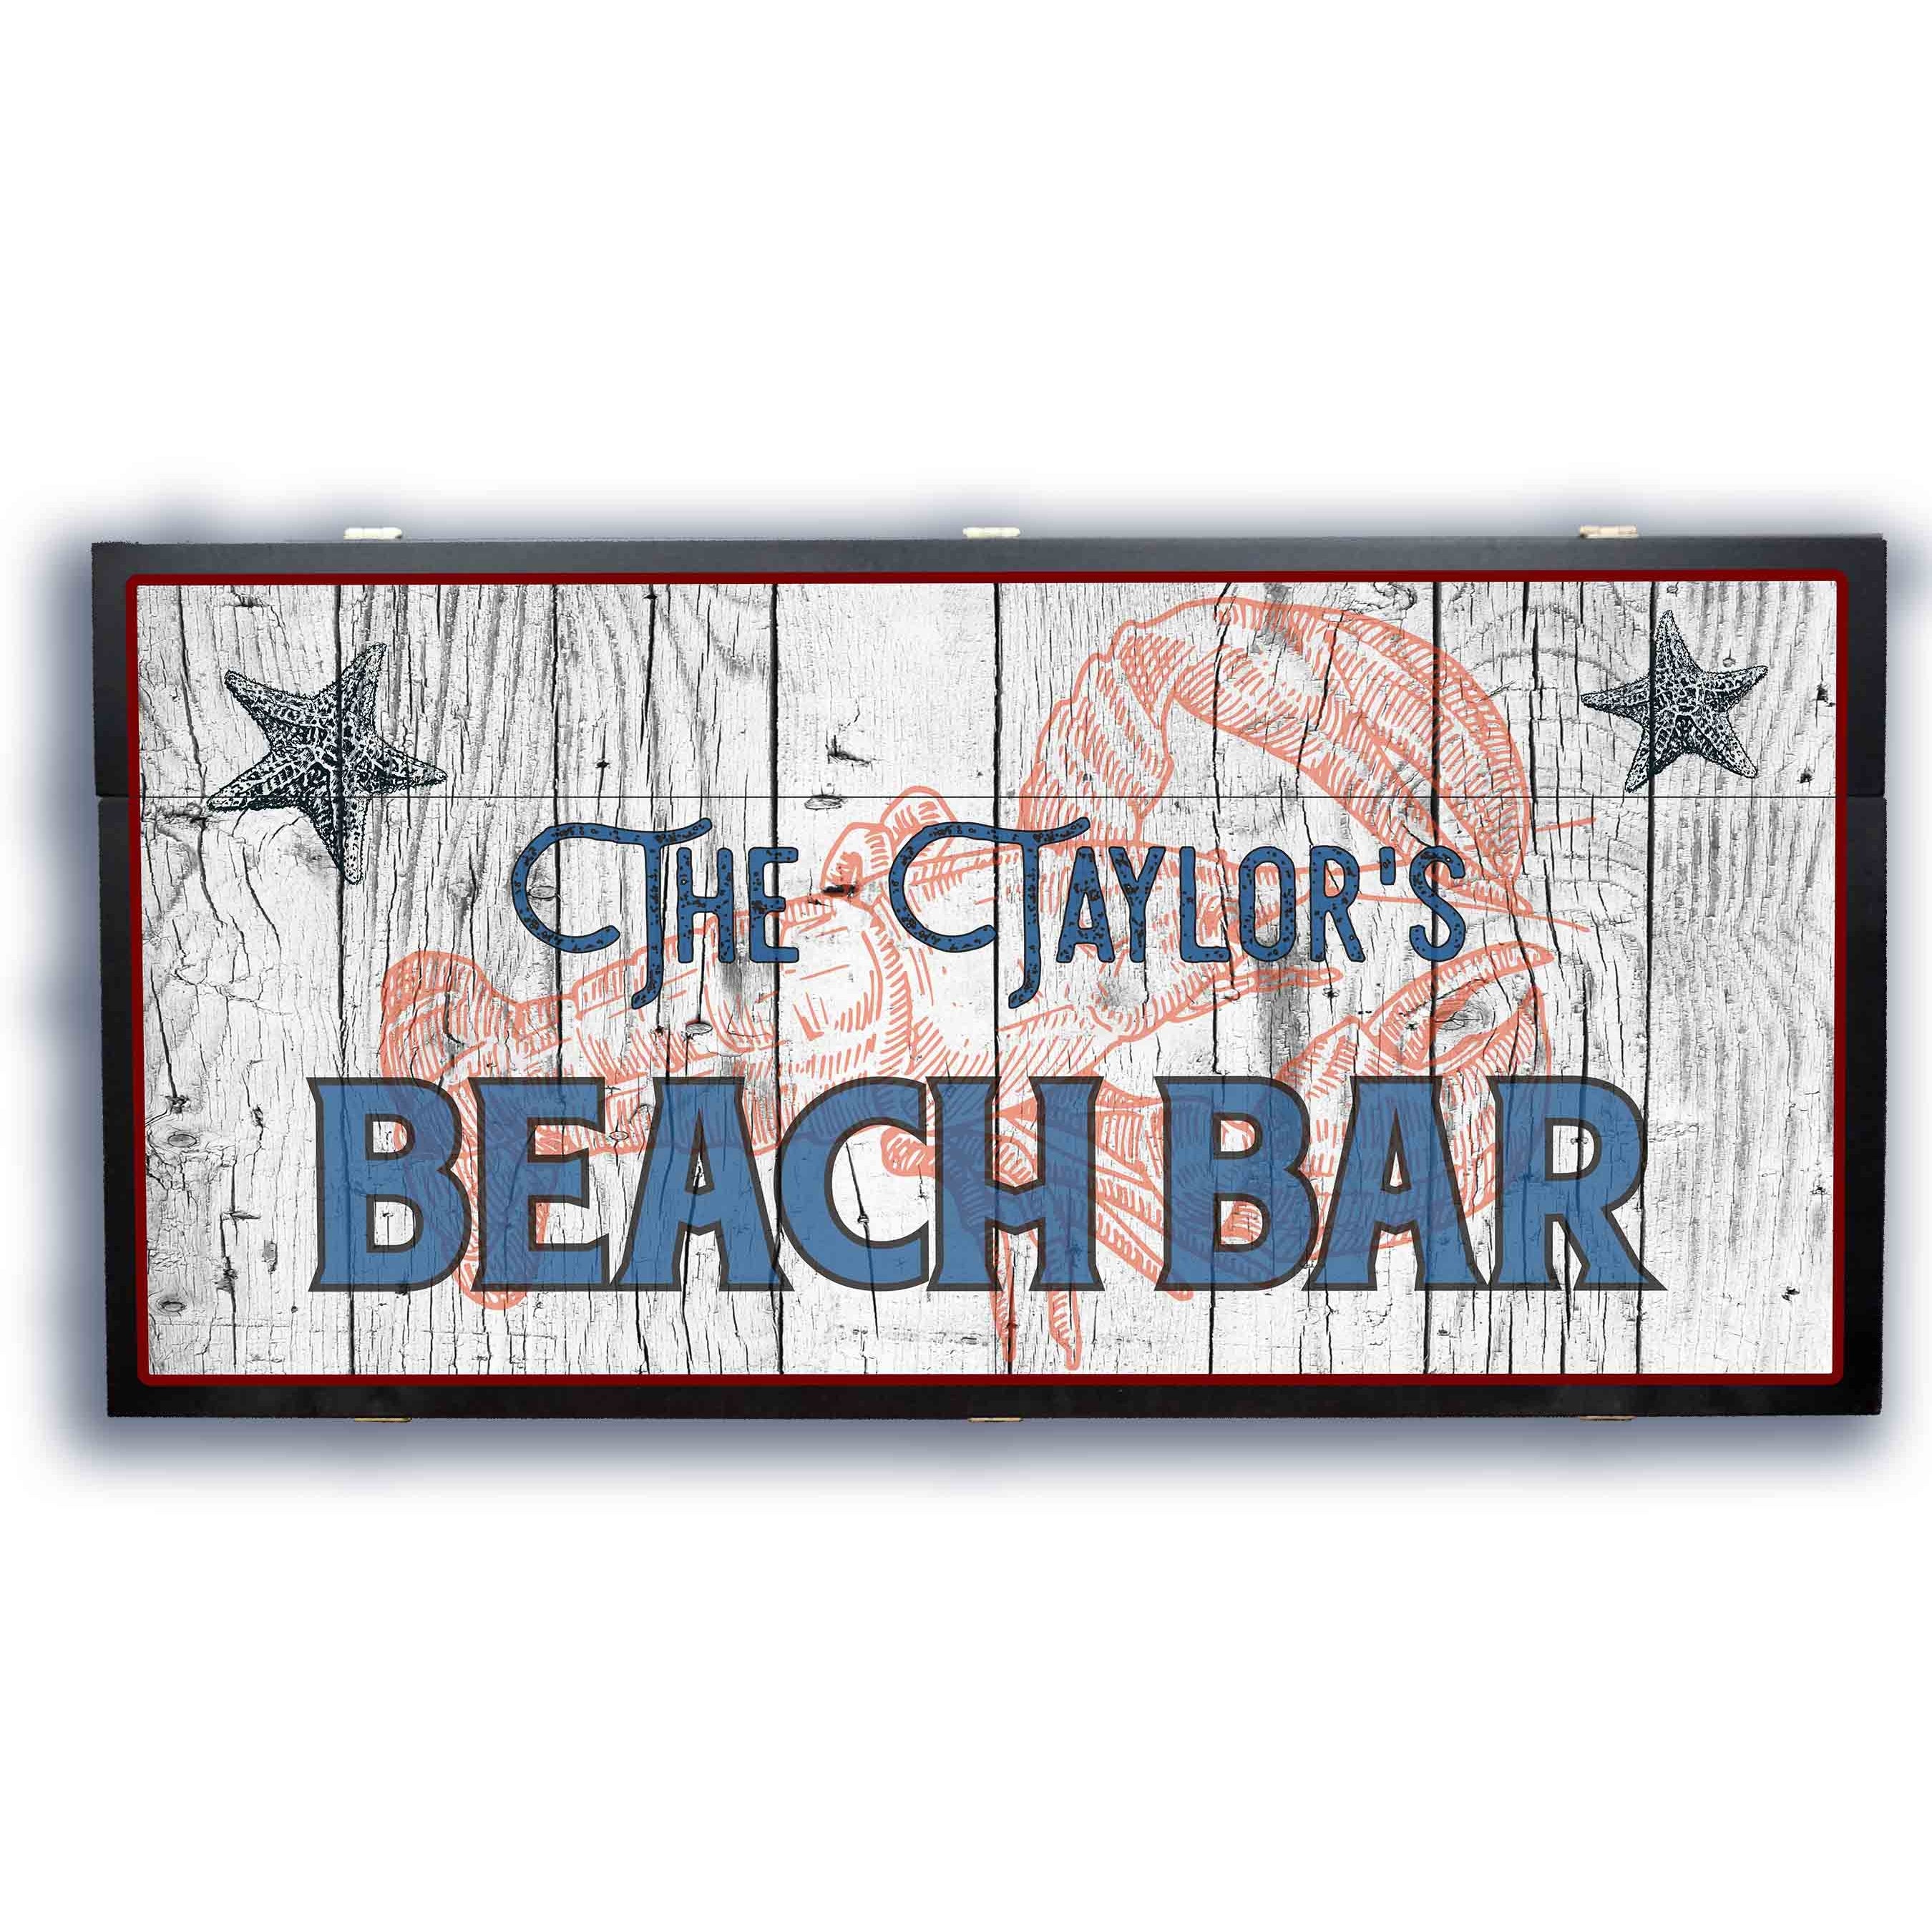 Personalized bar sign